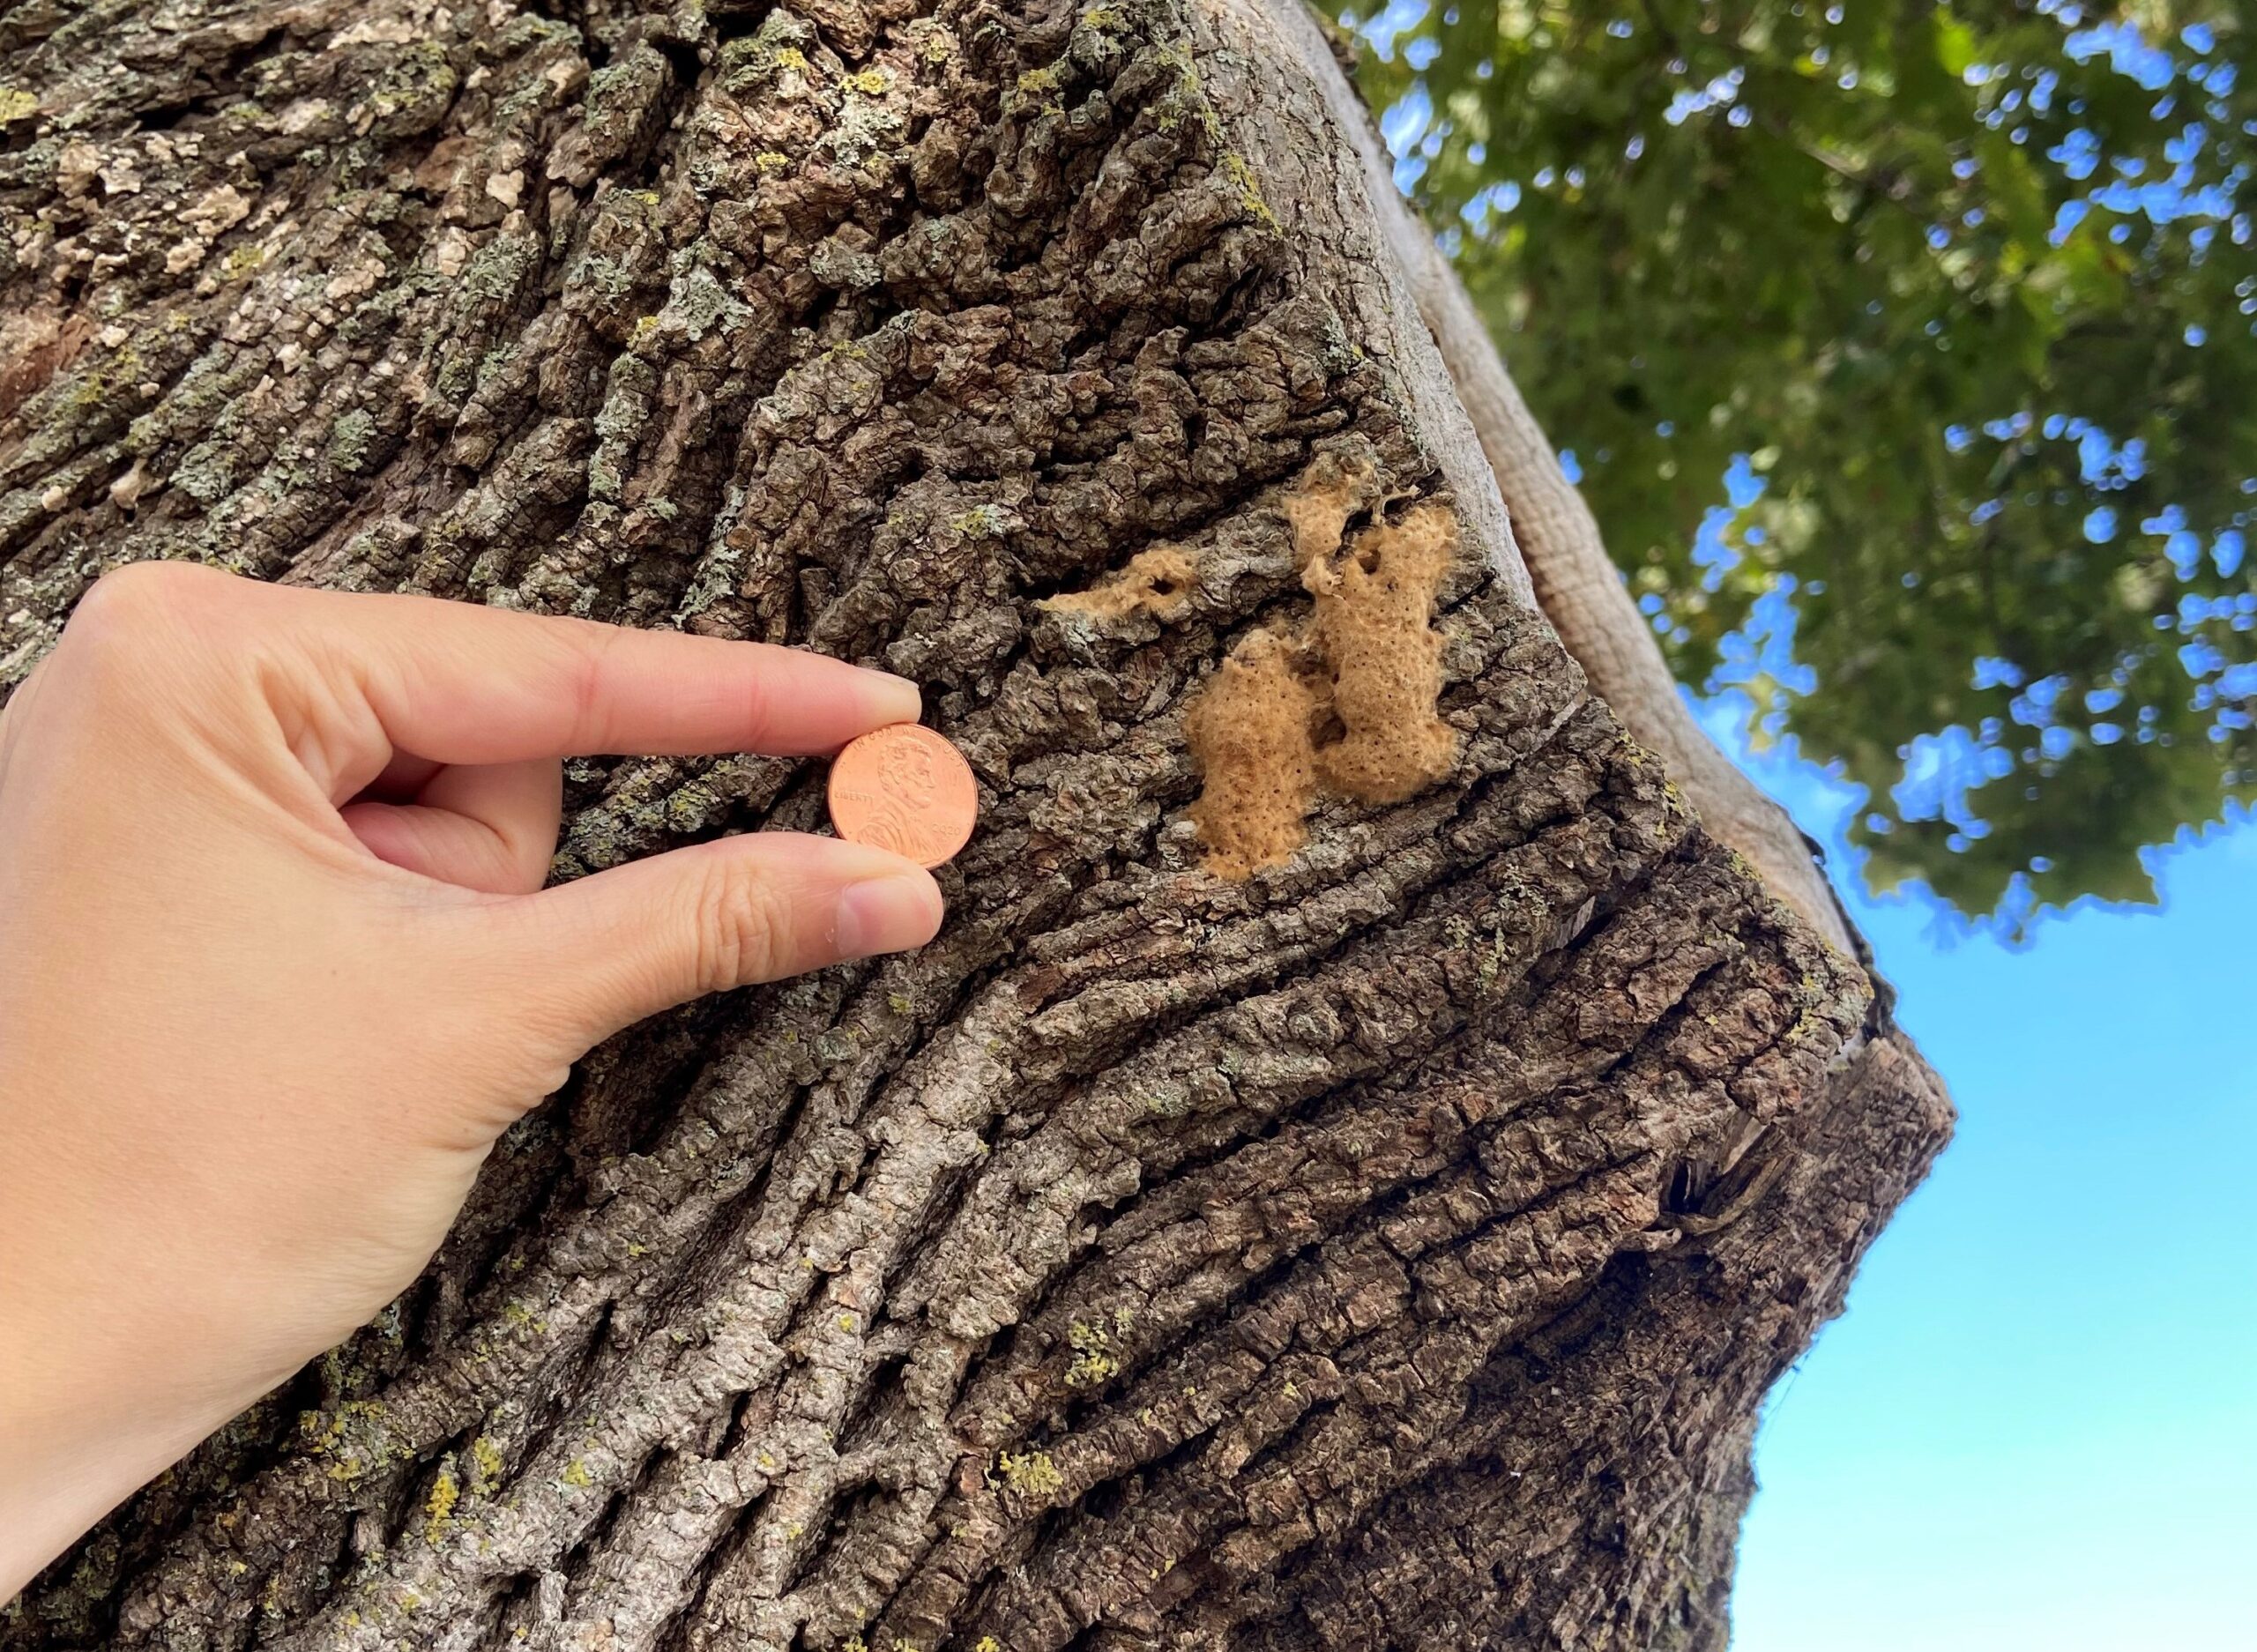 Spongy moth egg masses on a tree next to a penny for size comparison. 